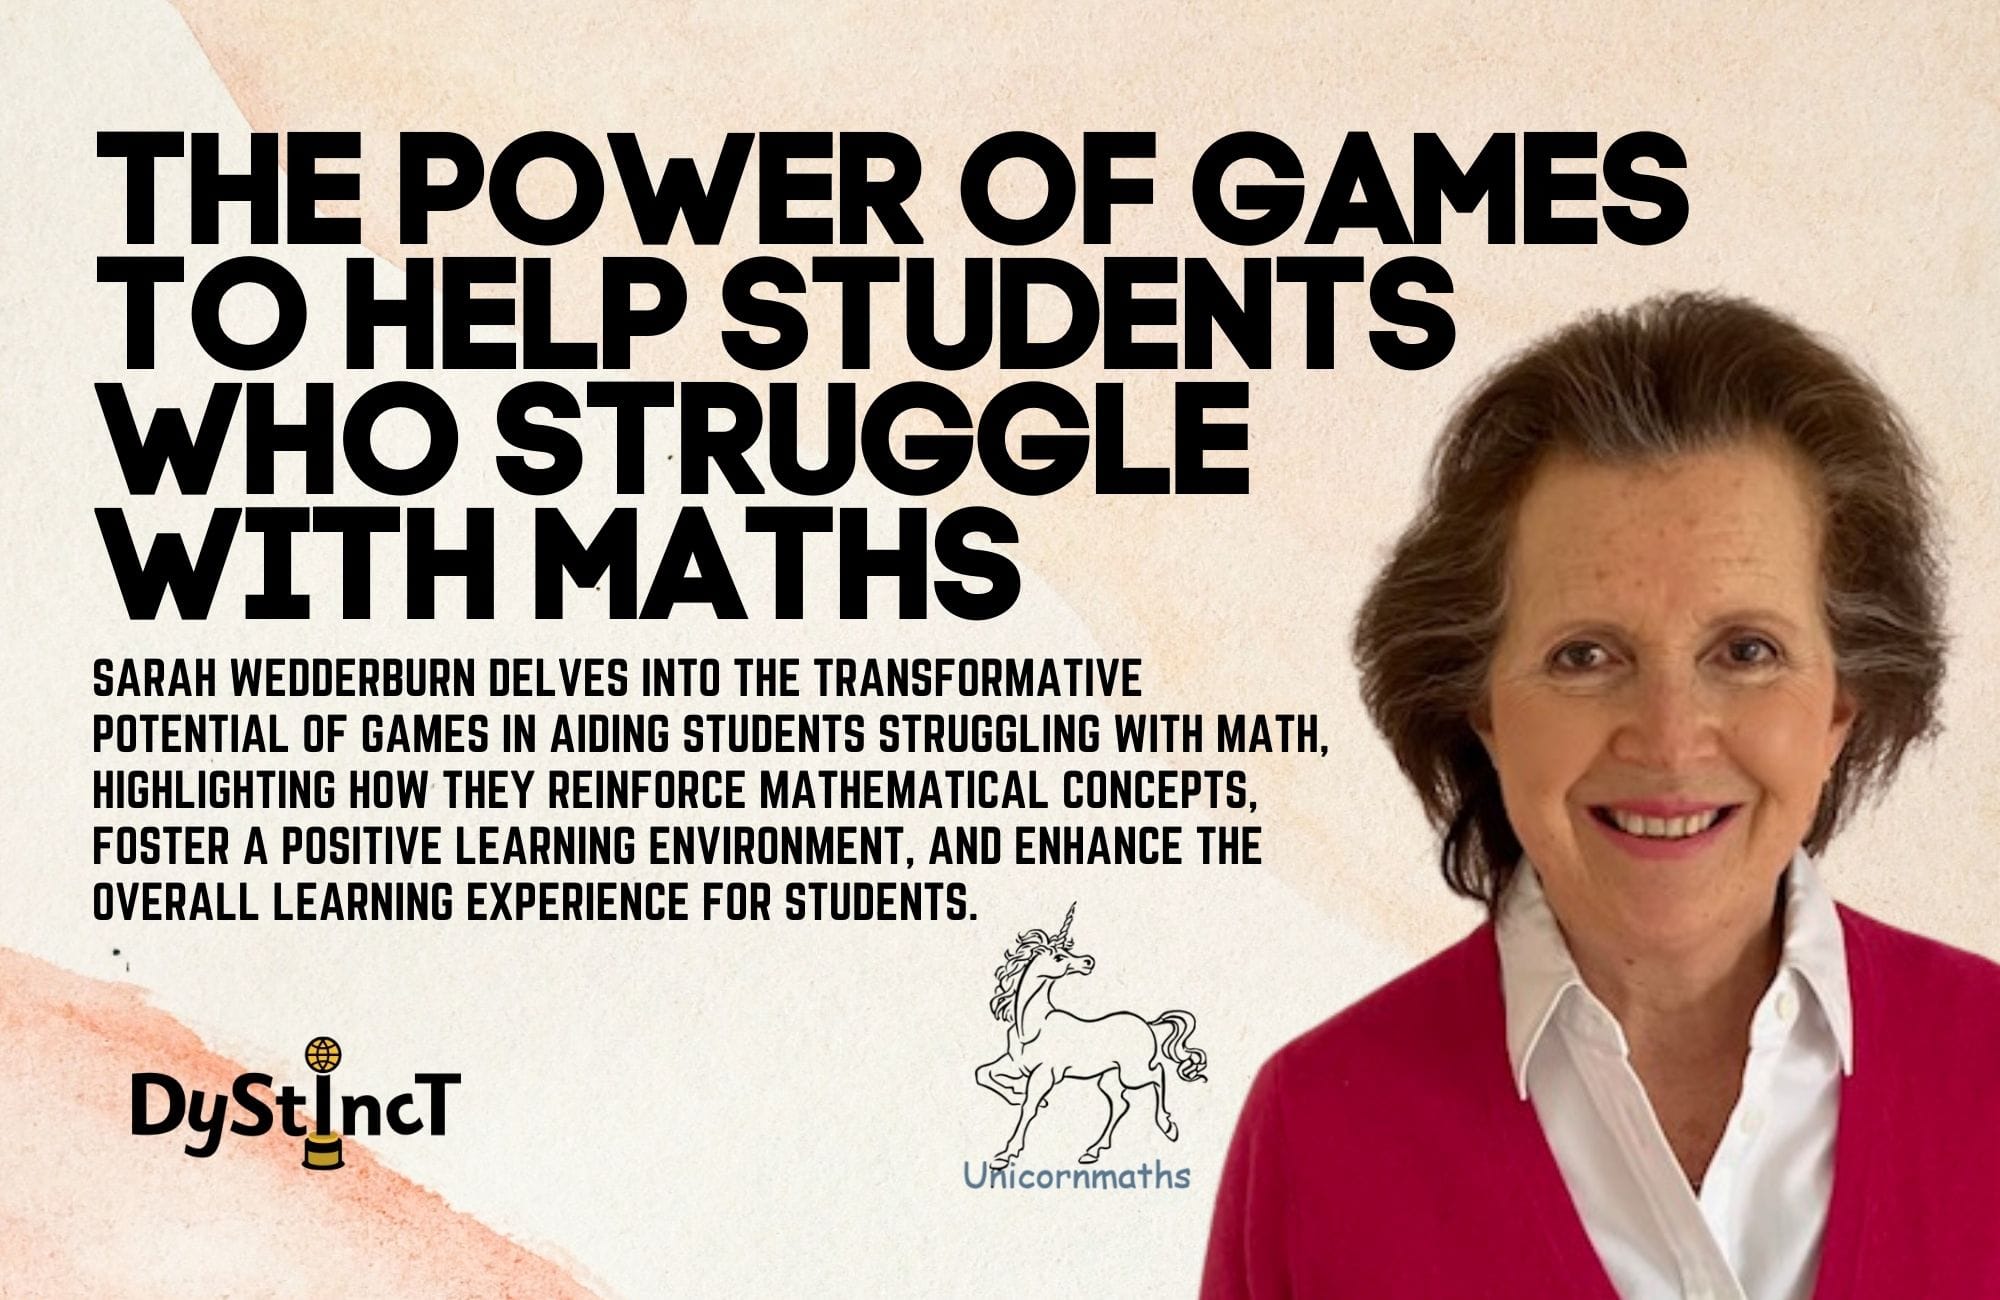 Issue 20: The power of games to help students who struggle with maths | Sarah Wedderburn